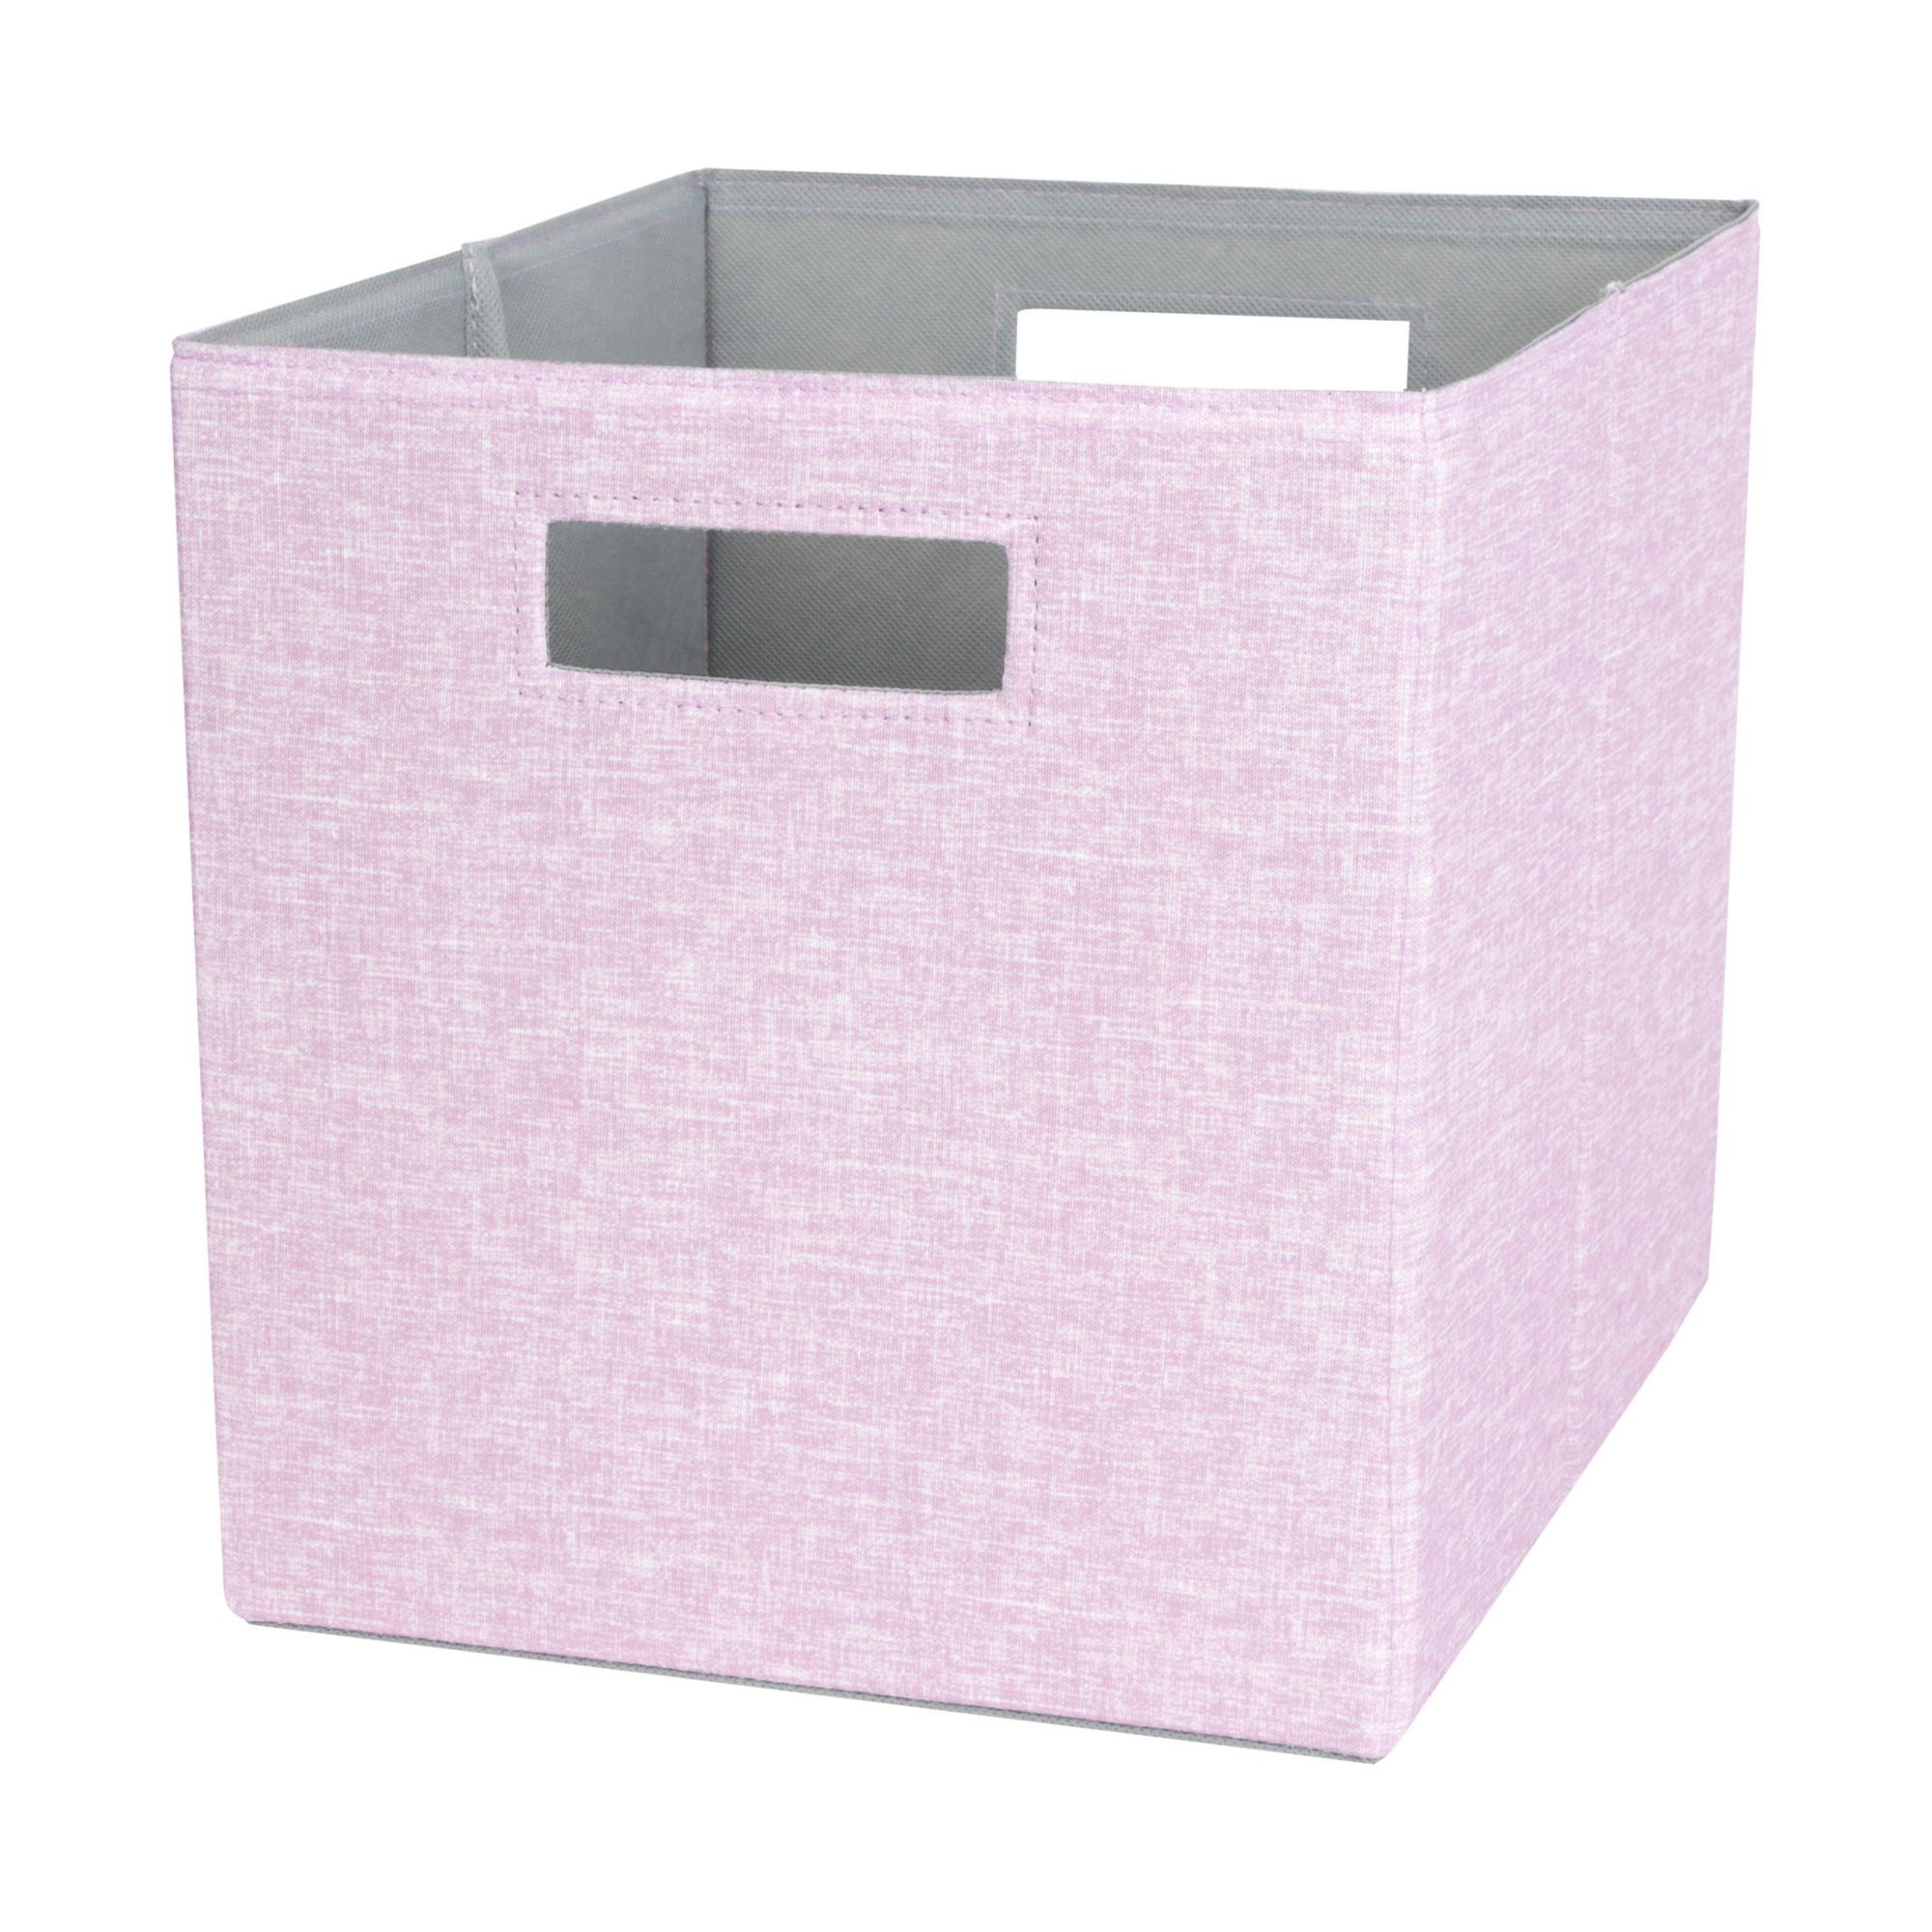 JUNZAN Bee Green Flower Good Luck Storage Bins With Lids Foldable Basement  Storage Storage And Organization for Office Supplies Office Basket